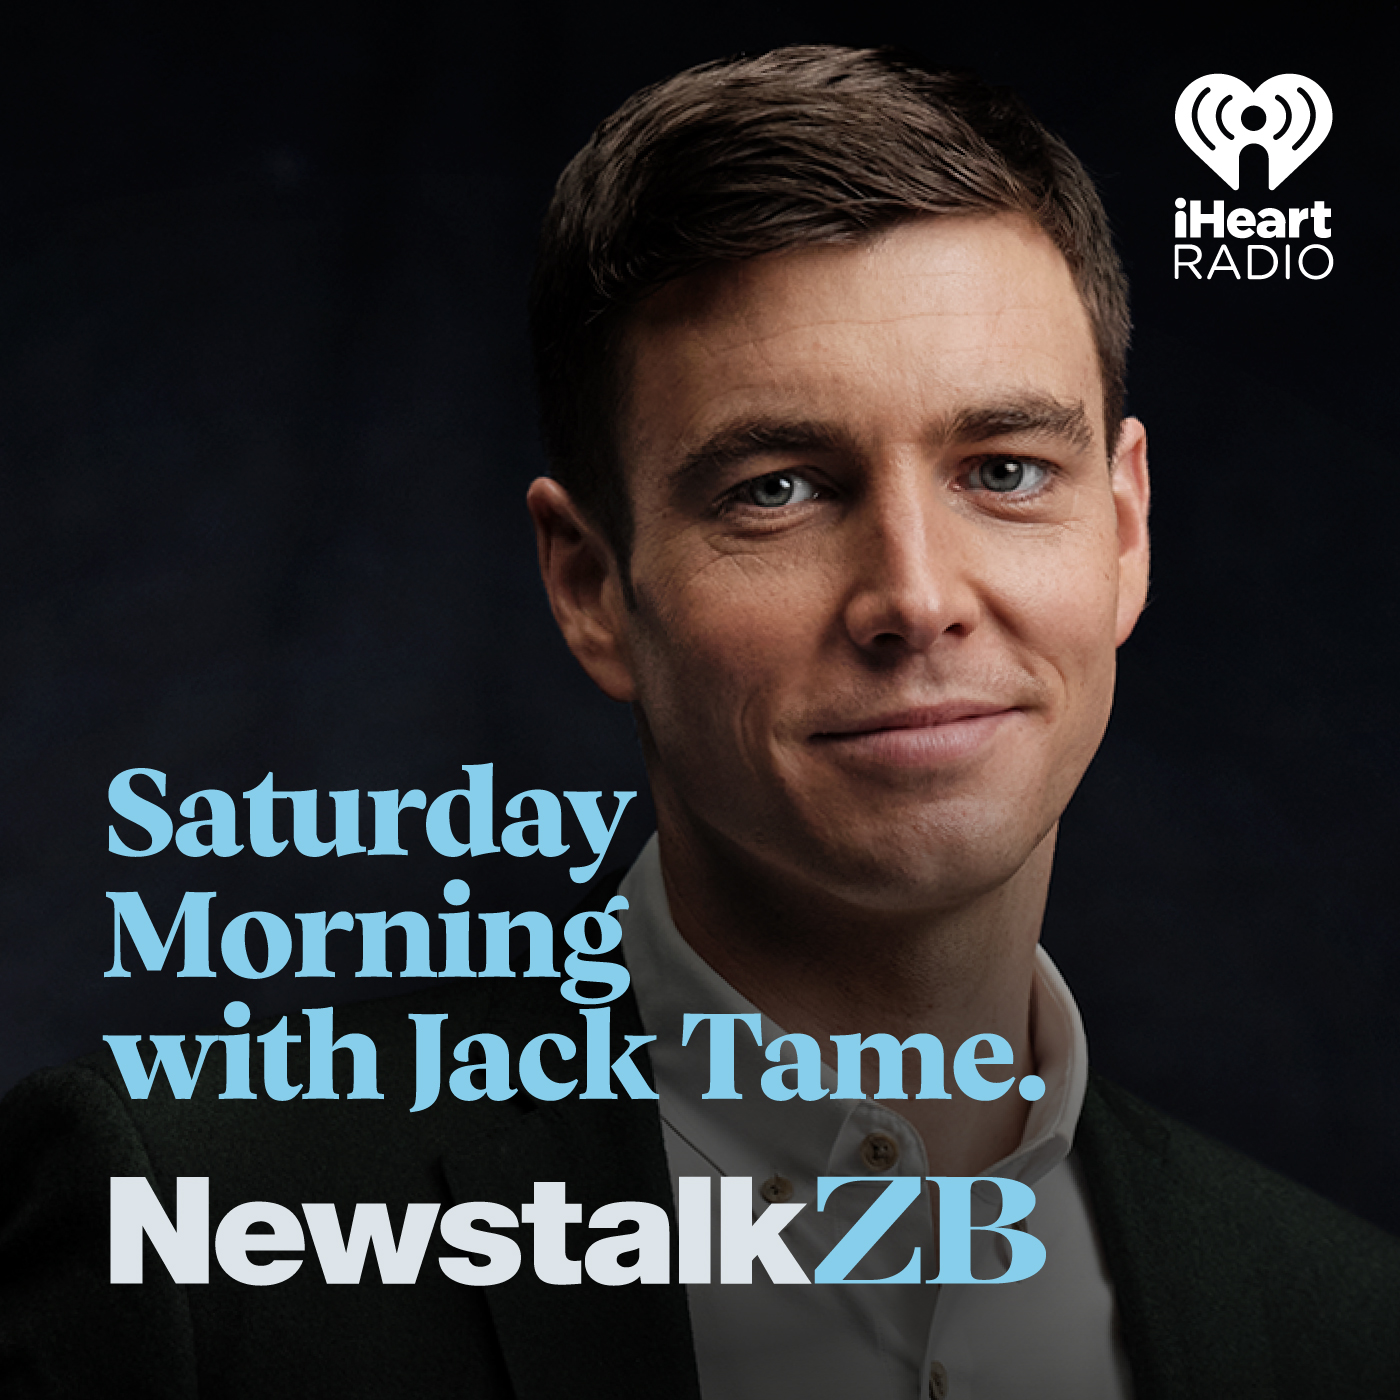 Jack Tame: Live from NYC Baby!